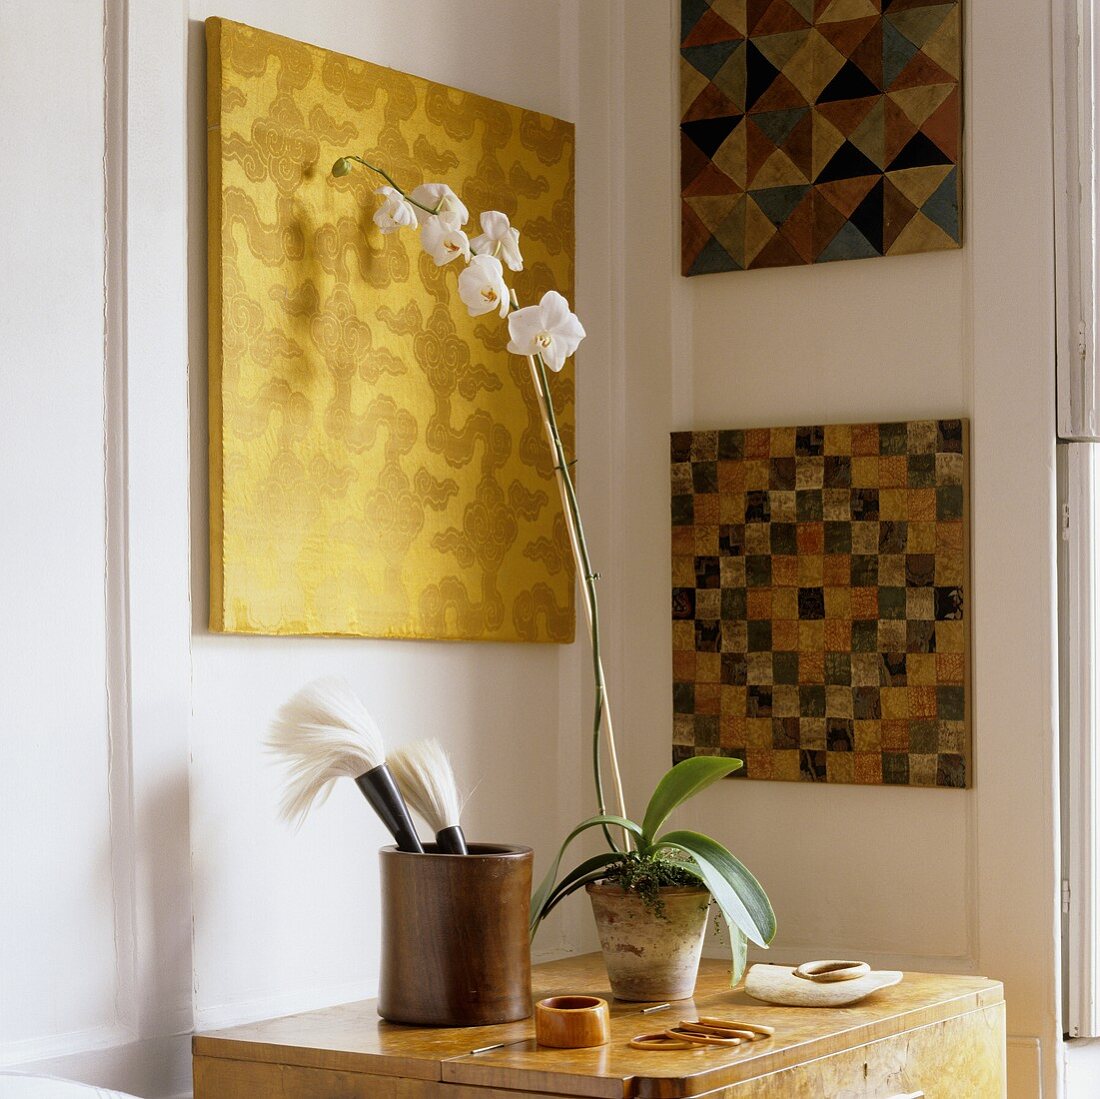 Geometric patterns on canvases in the corner of a living room and white orchids in a pot